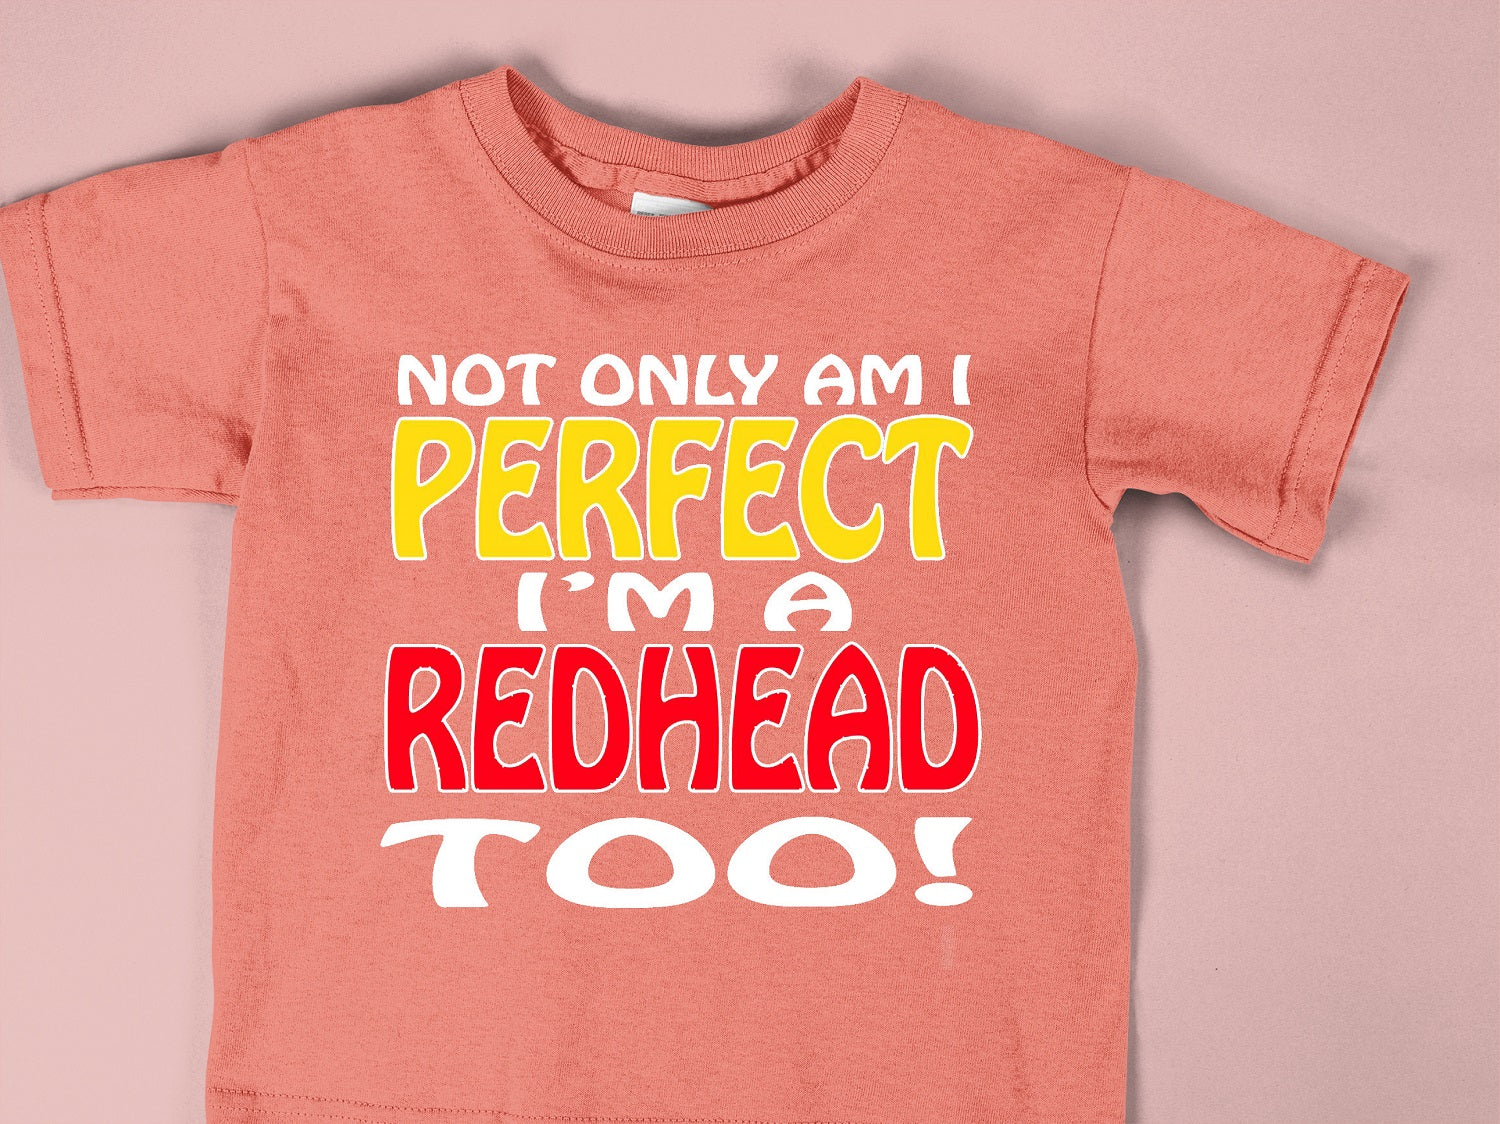 Not Only Am I Perfect I Am A Redhead Too! - KID-039